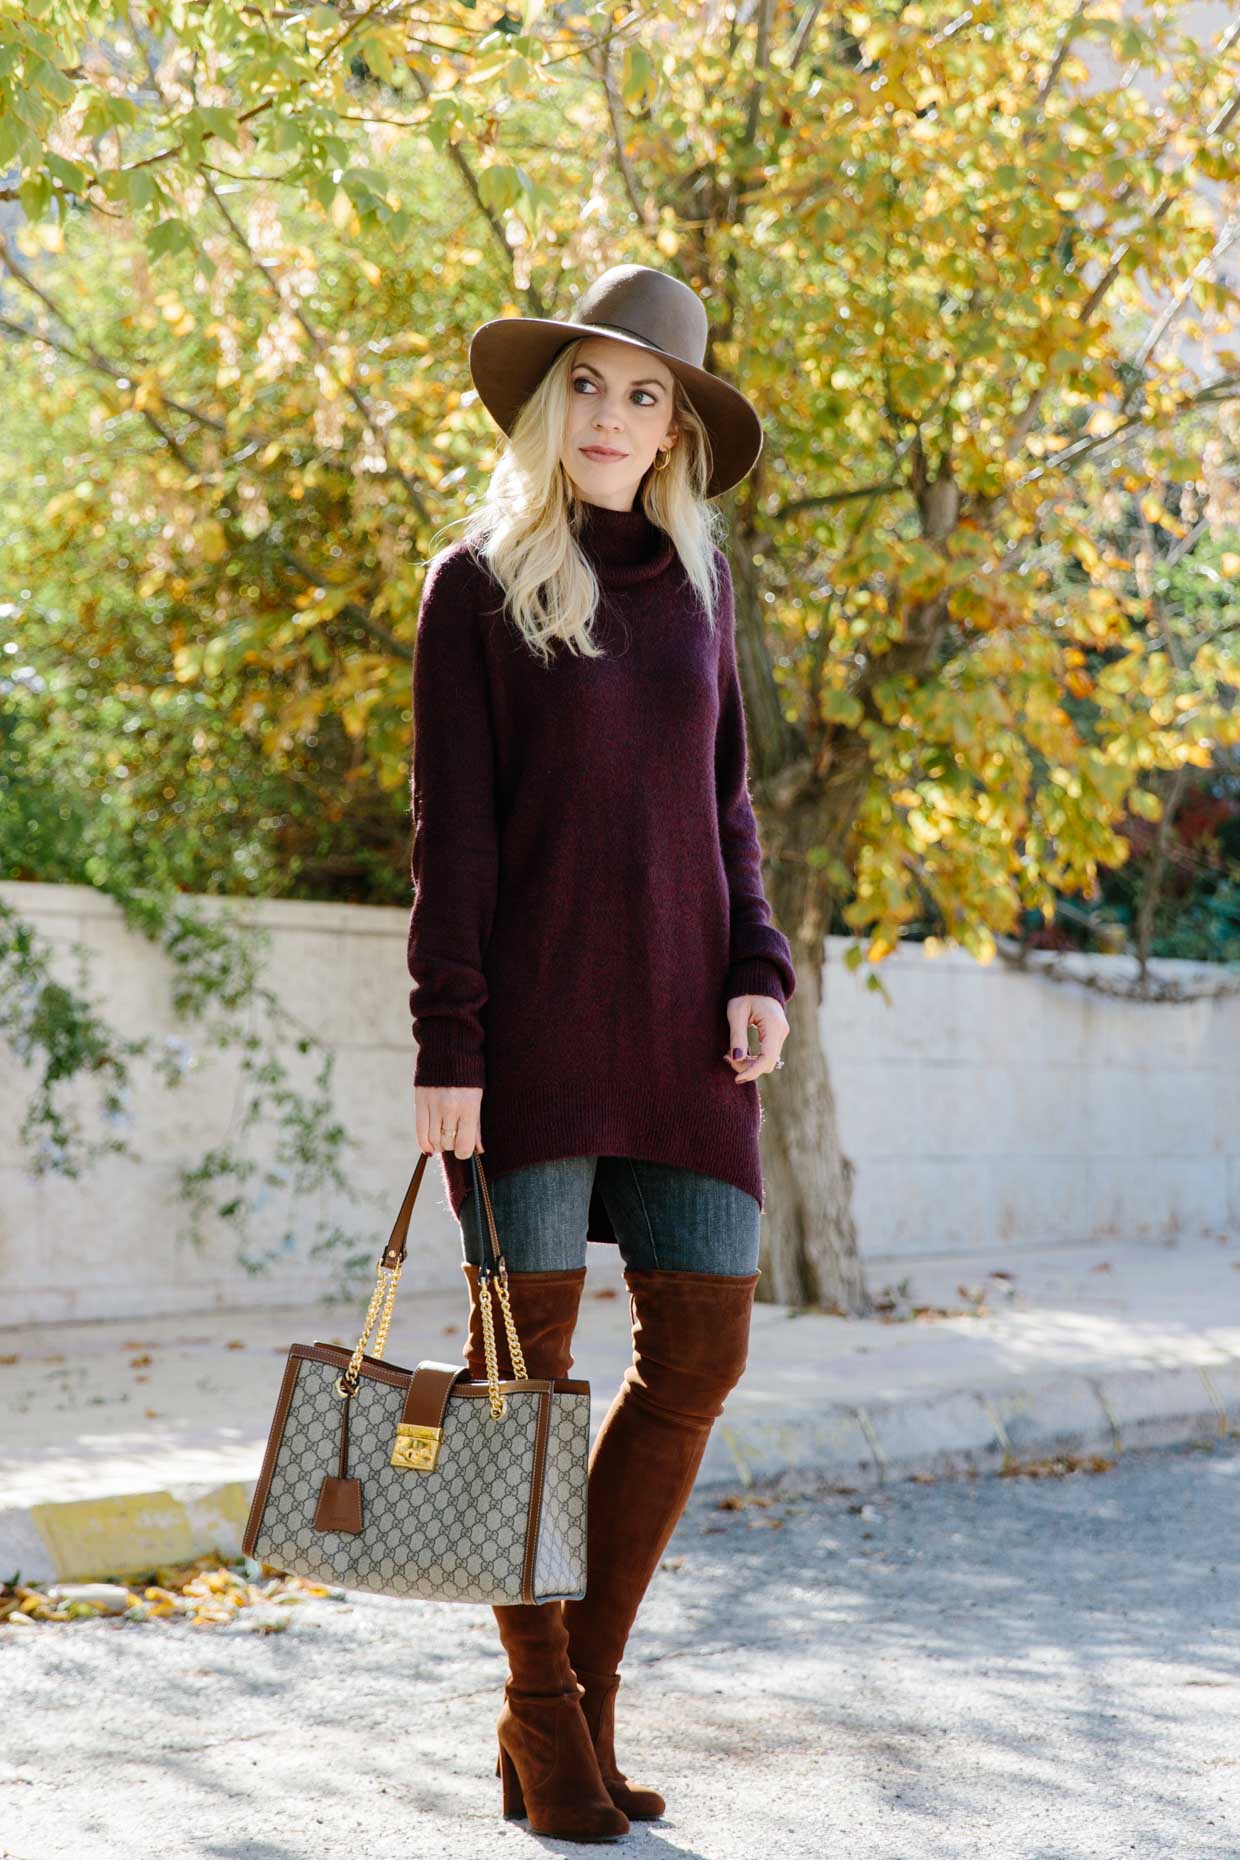 12 LV boots outfits ideas  outfits, fashion outfits, autumn fashion